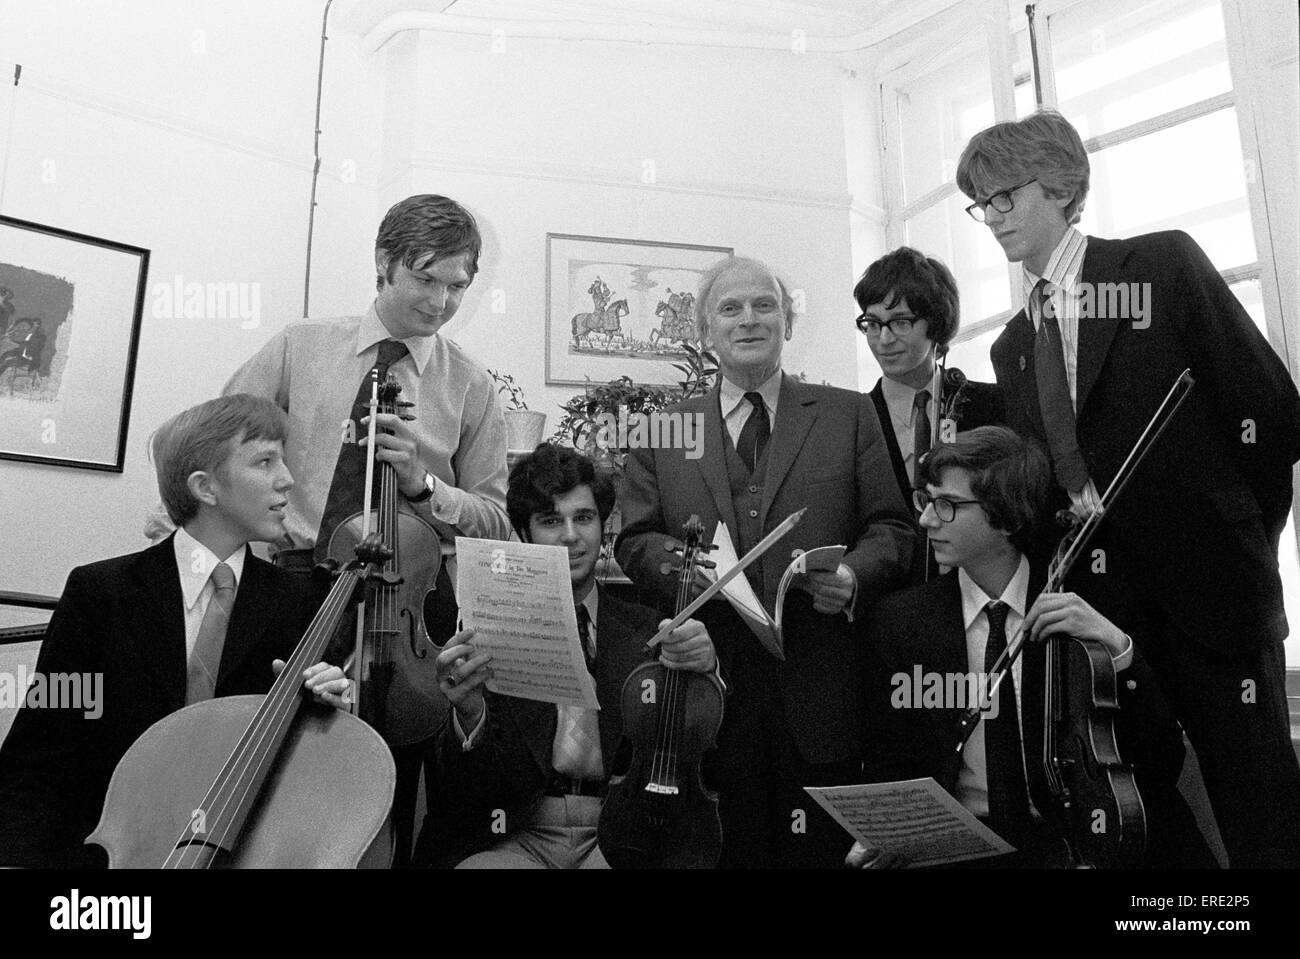 American-born violinist and conductor Yehudi Menuhin (1916-1999) pictured with members of the William Ellis School Orchestra in Stock Photo